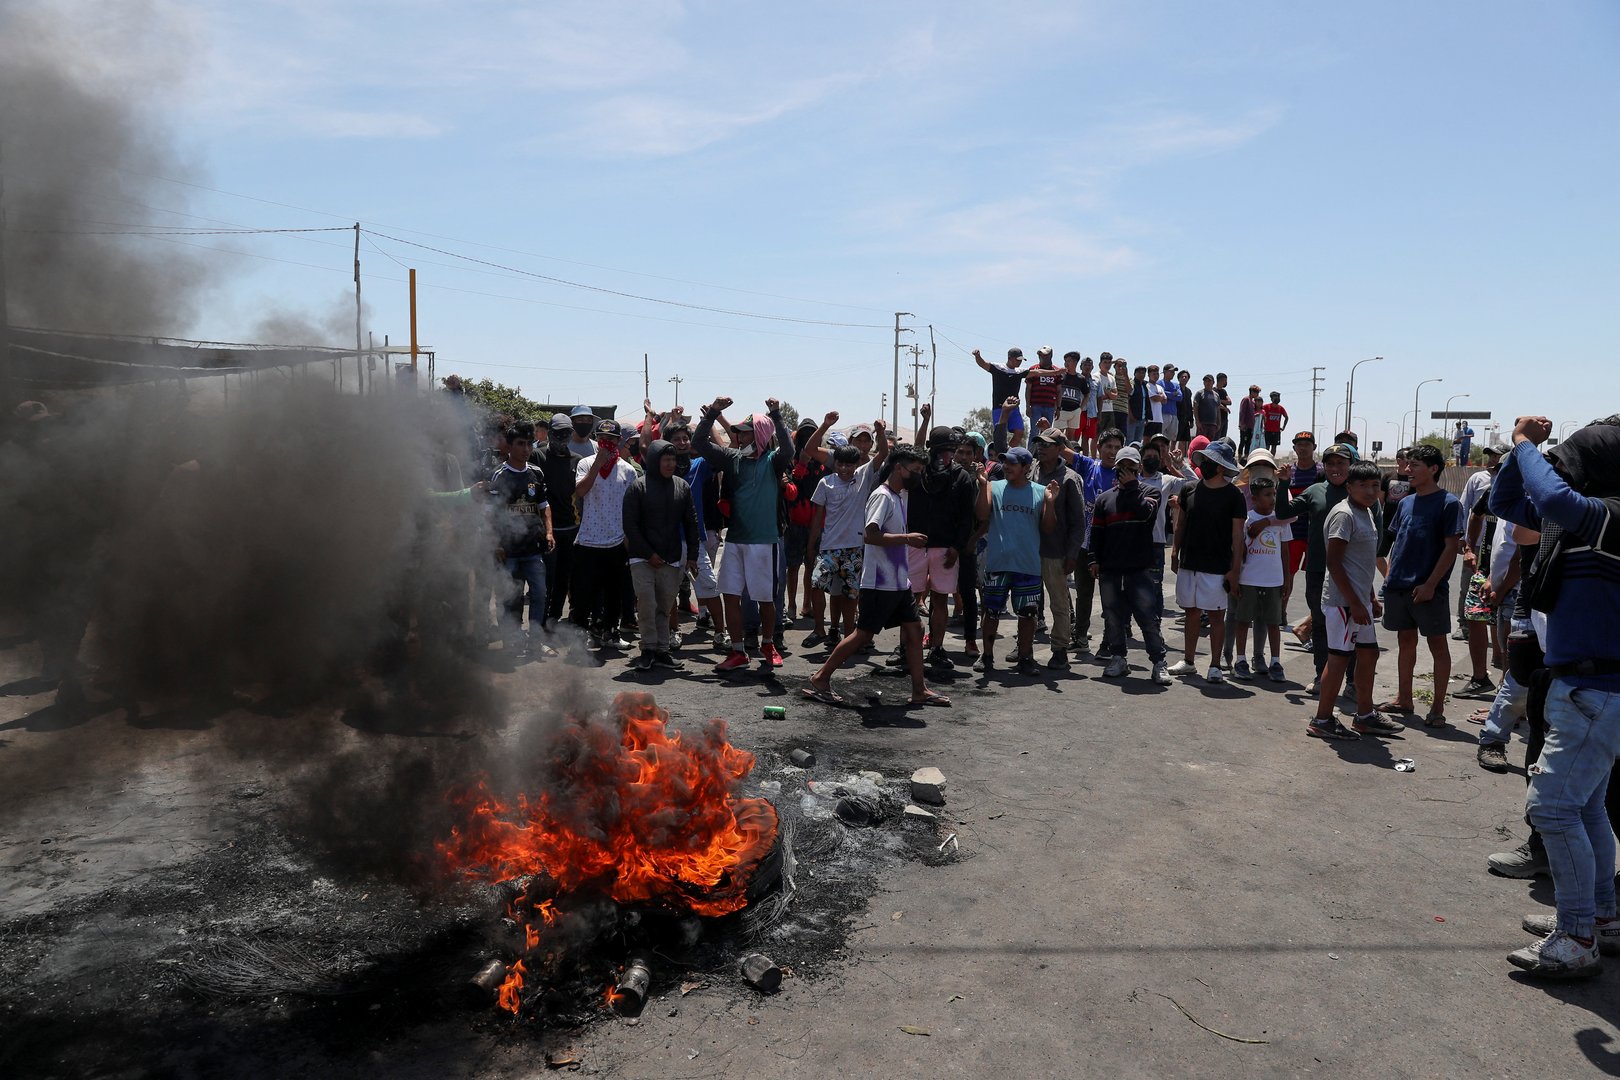 image Peru protesters clash with police in airport takeover attempt in Puno